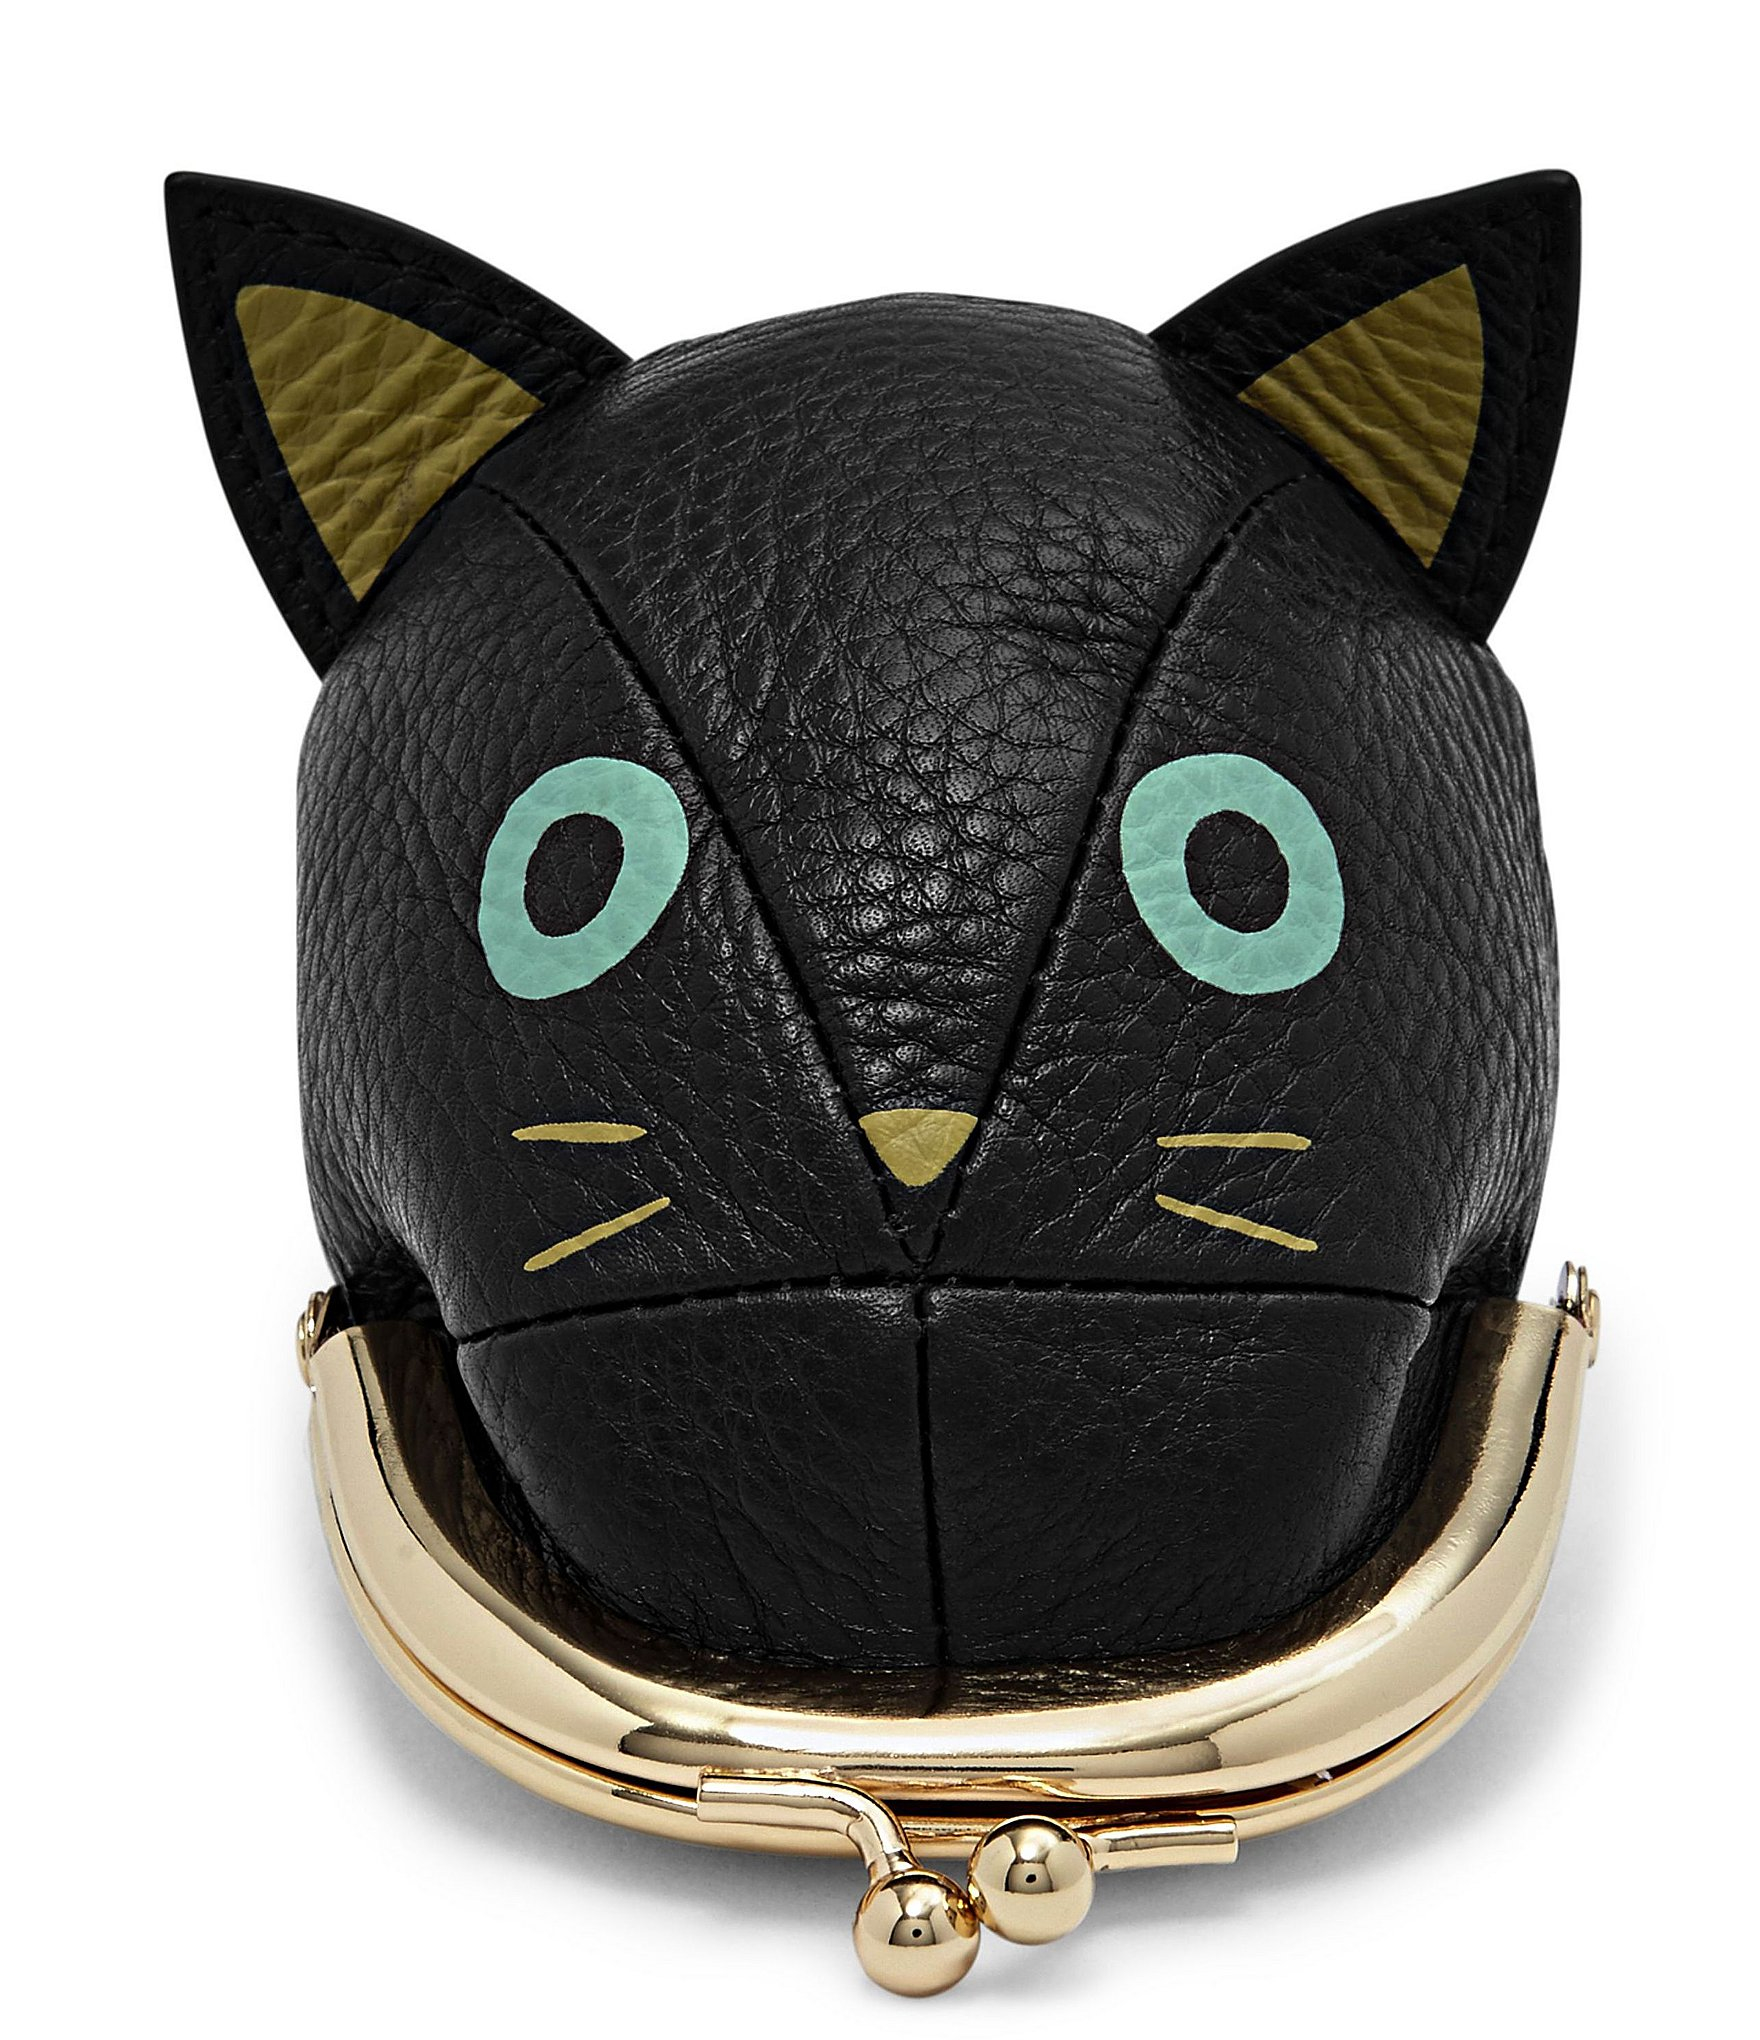 Lyst Fossil Cat Kiss Lock Frame Coin Purse In Black